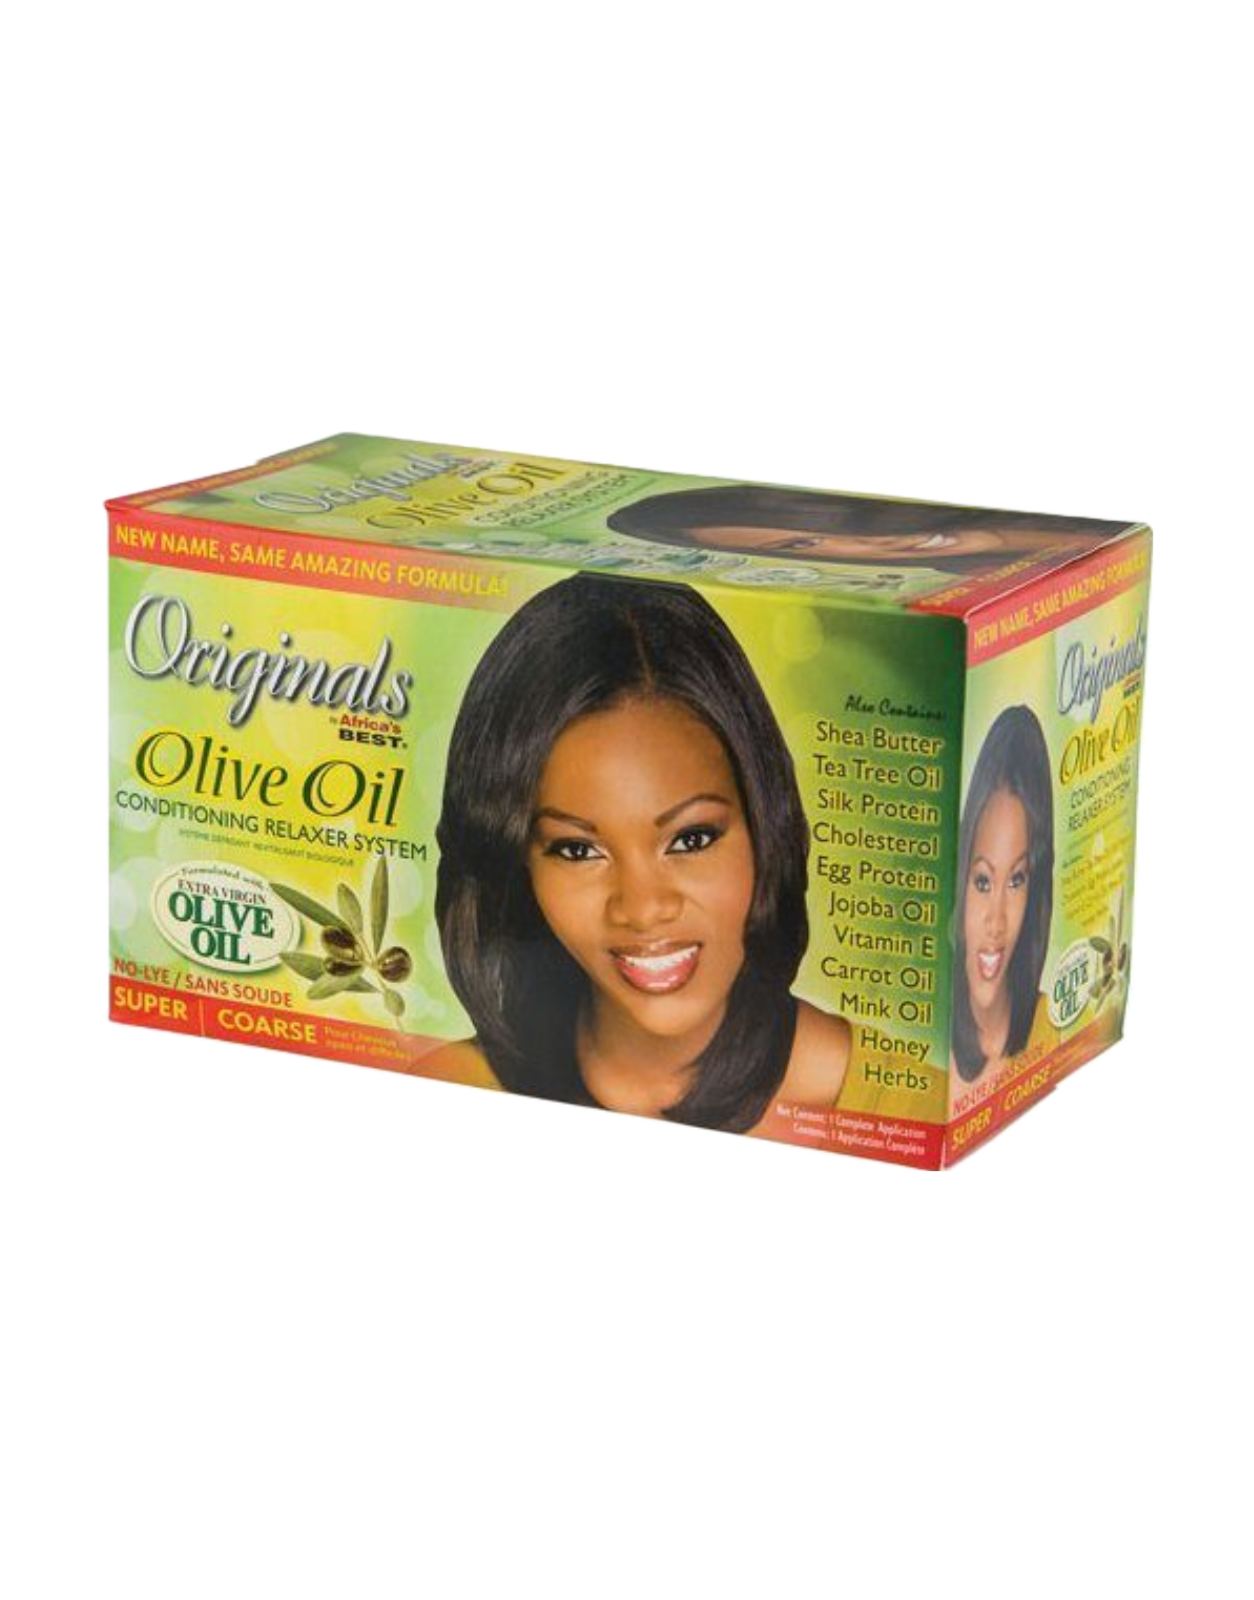 Originals by Africa's Best - Olive Oil Relaxer Kit Super